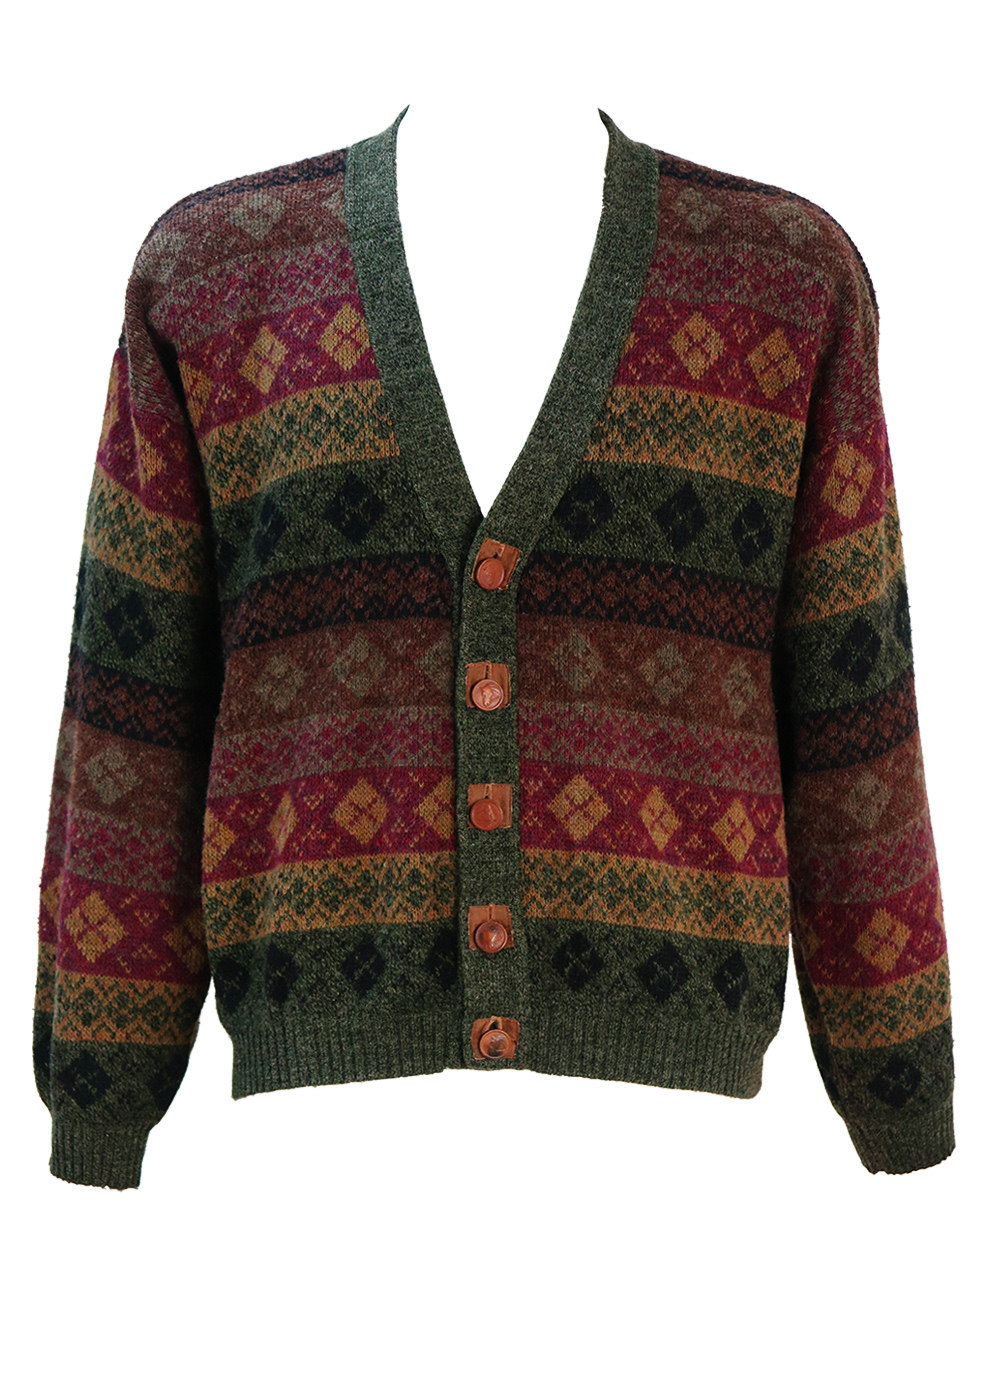 Fair Isle Patterned Cardigan in Burgundy, Brown, Green & Black with ...